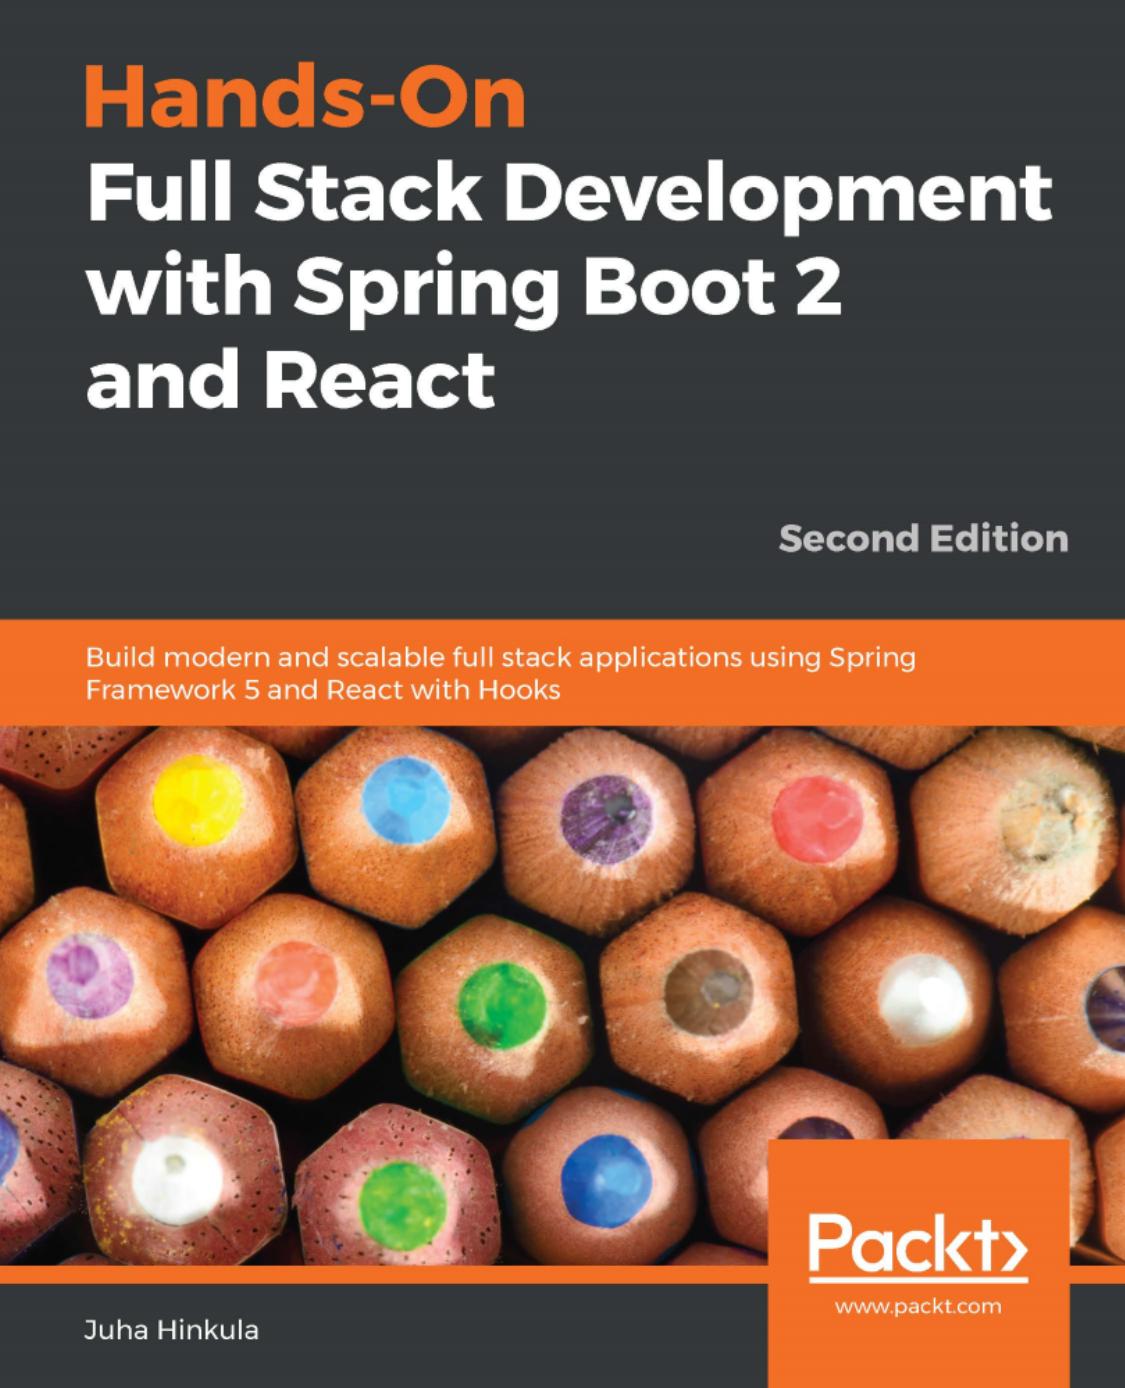 Hands-On Full Stack Development with Spring Boot 2 and React: Build Modern and Scalable Full Stack Applications using Spring Framework 5 and React with Hooks, 2nd Edition